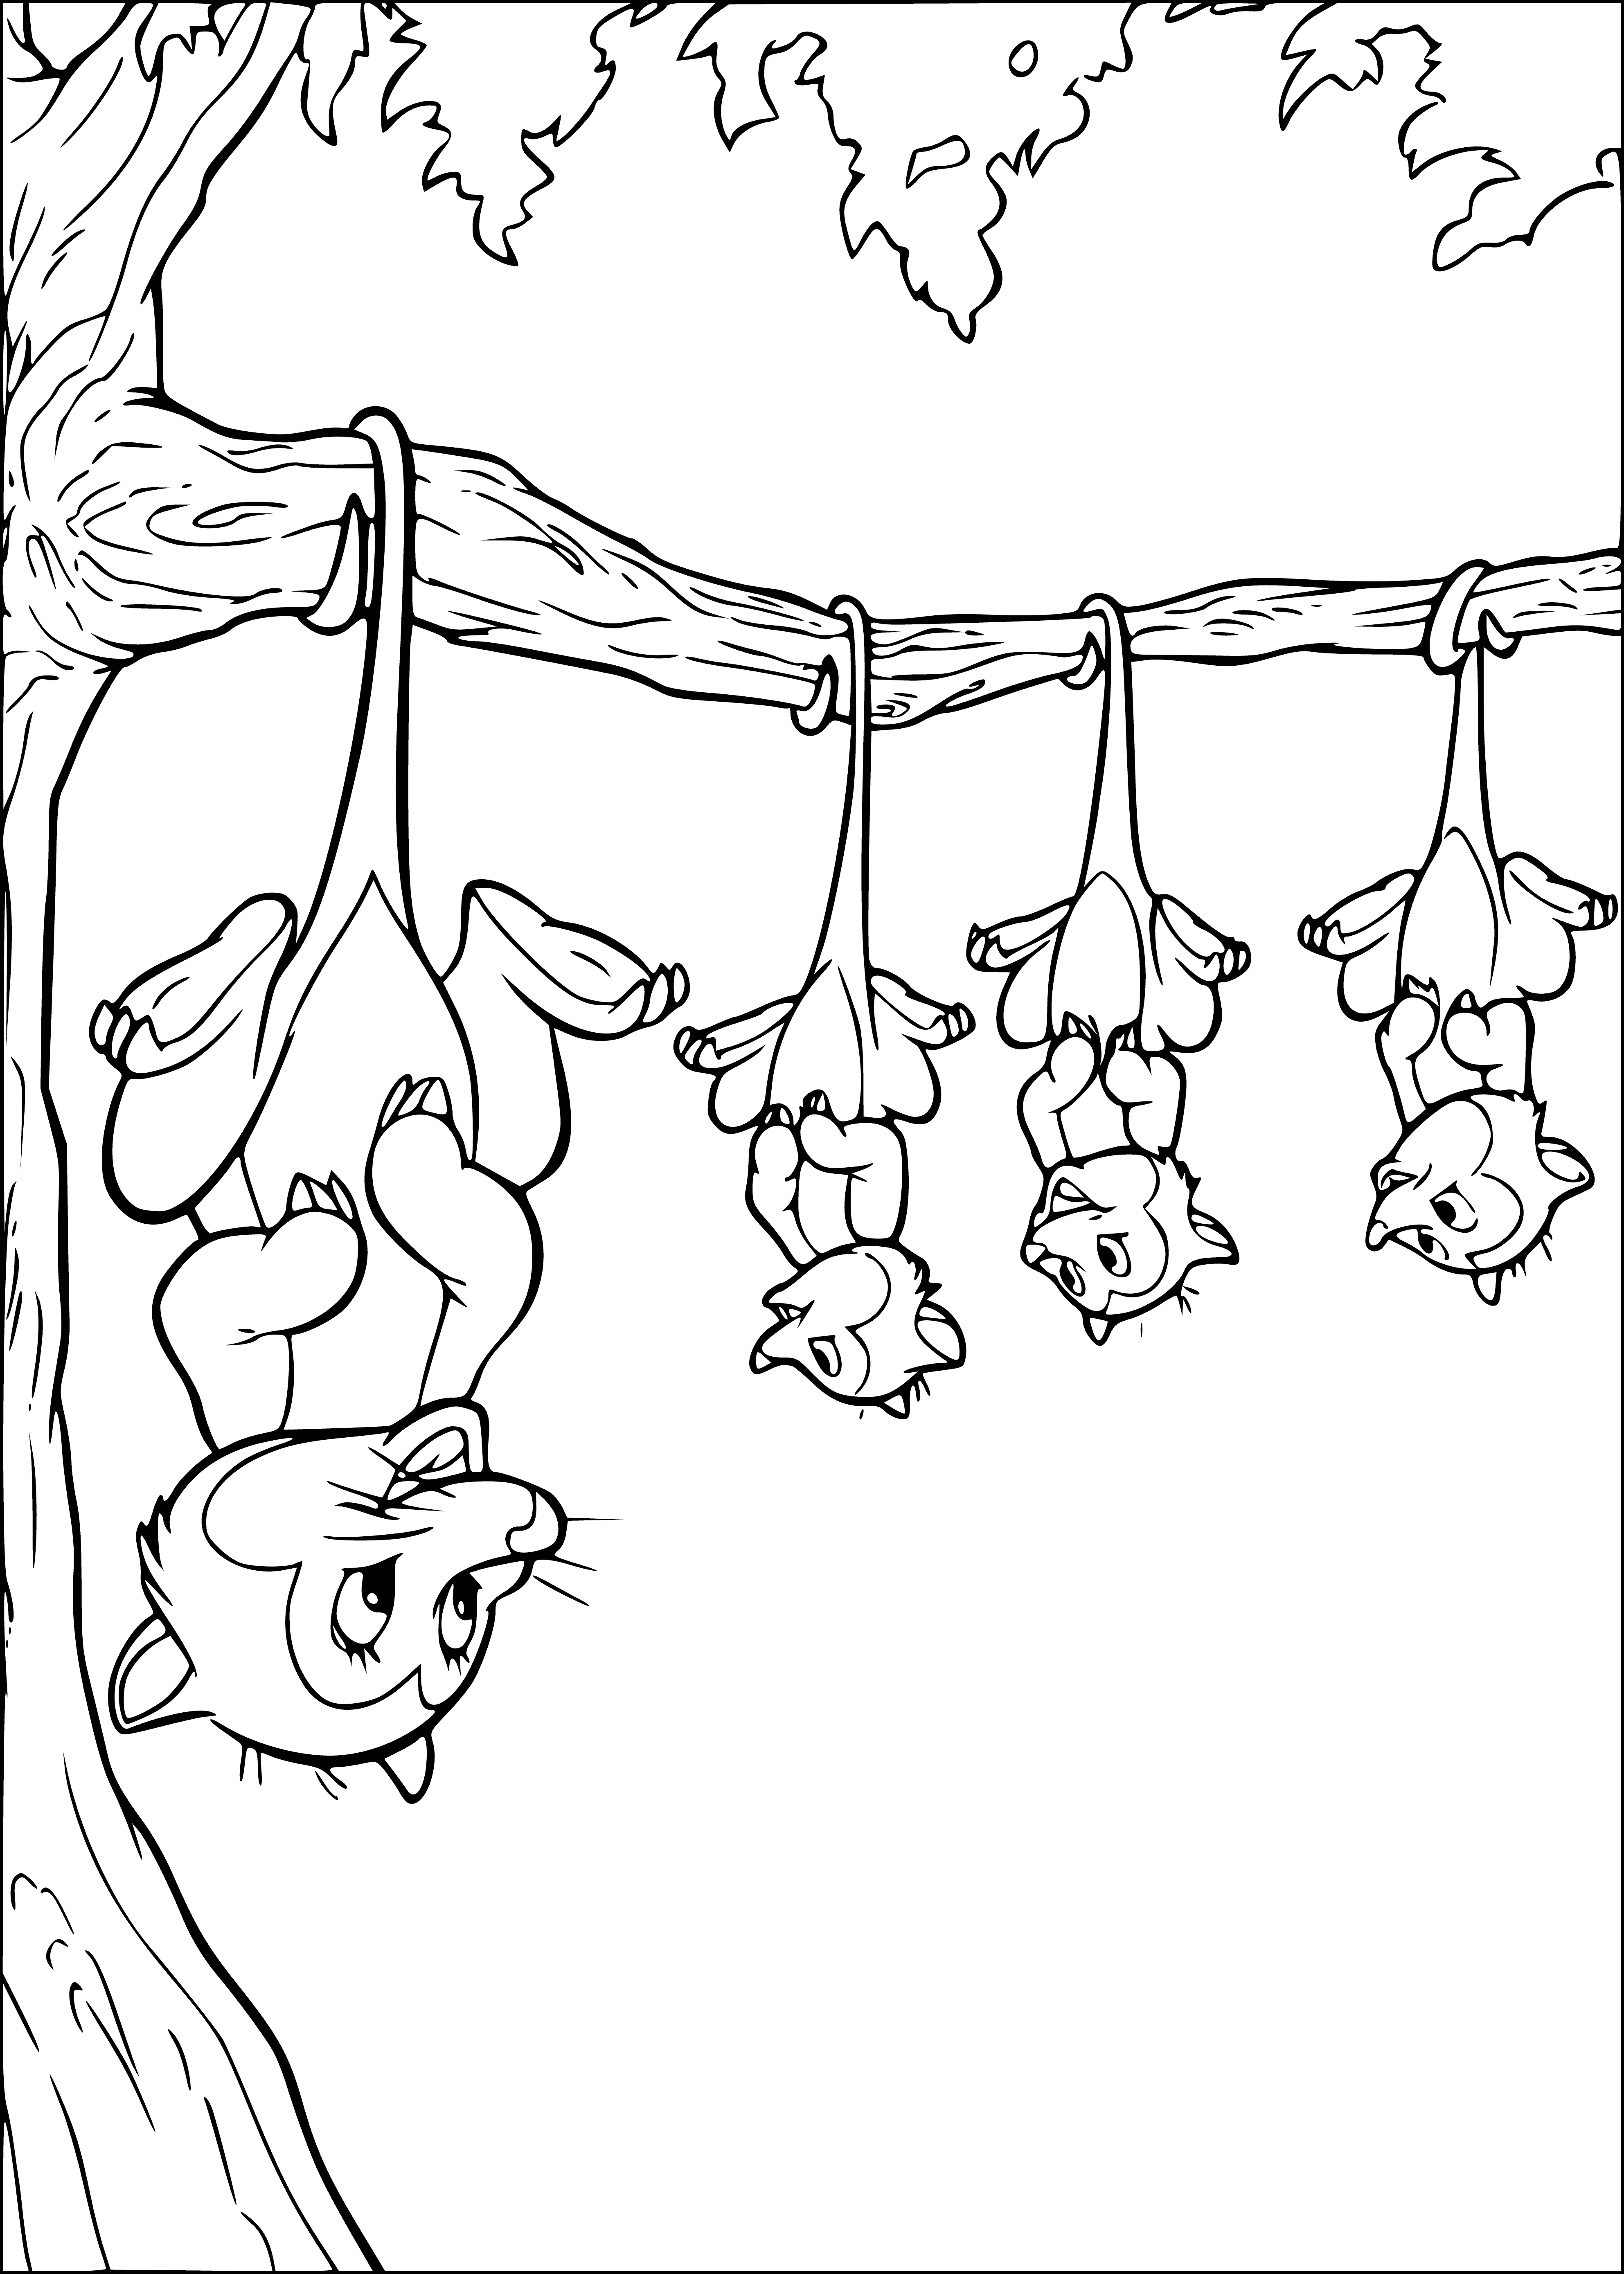 Possums coloring page